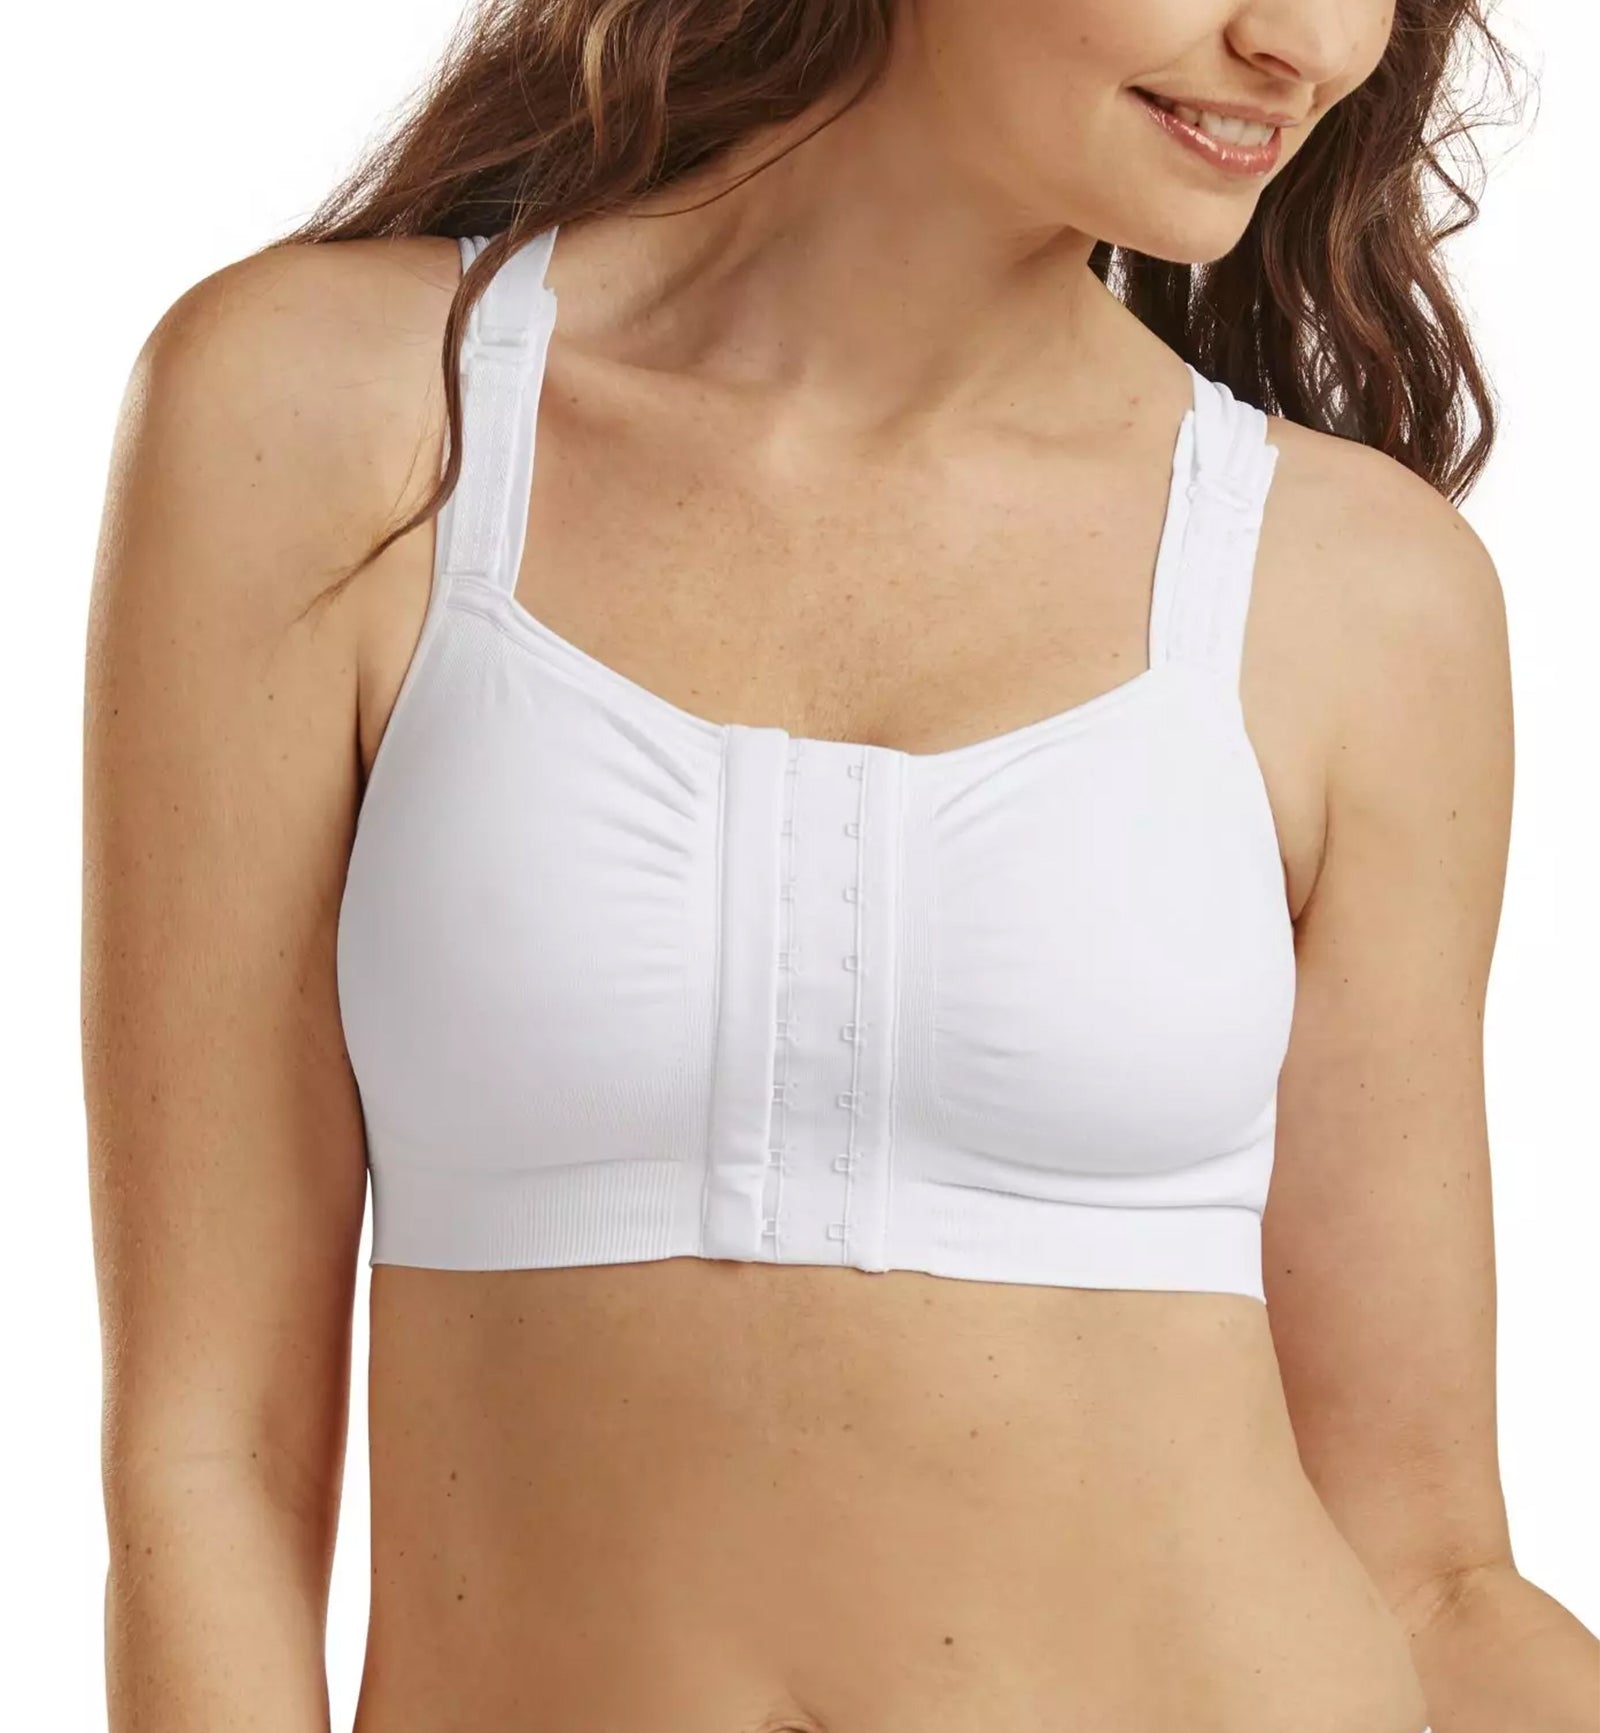 Carefix 3343 Tytex Mary Seampless Post-Op Bra, White, 3XL – imedsales